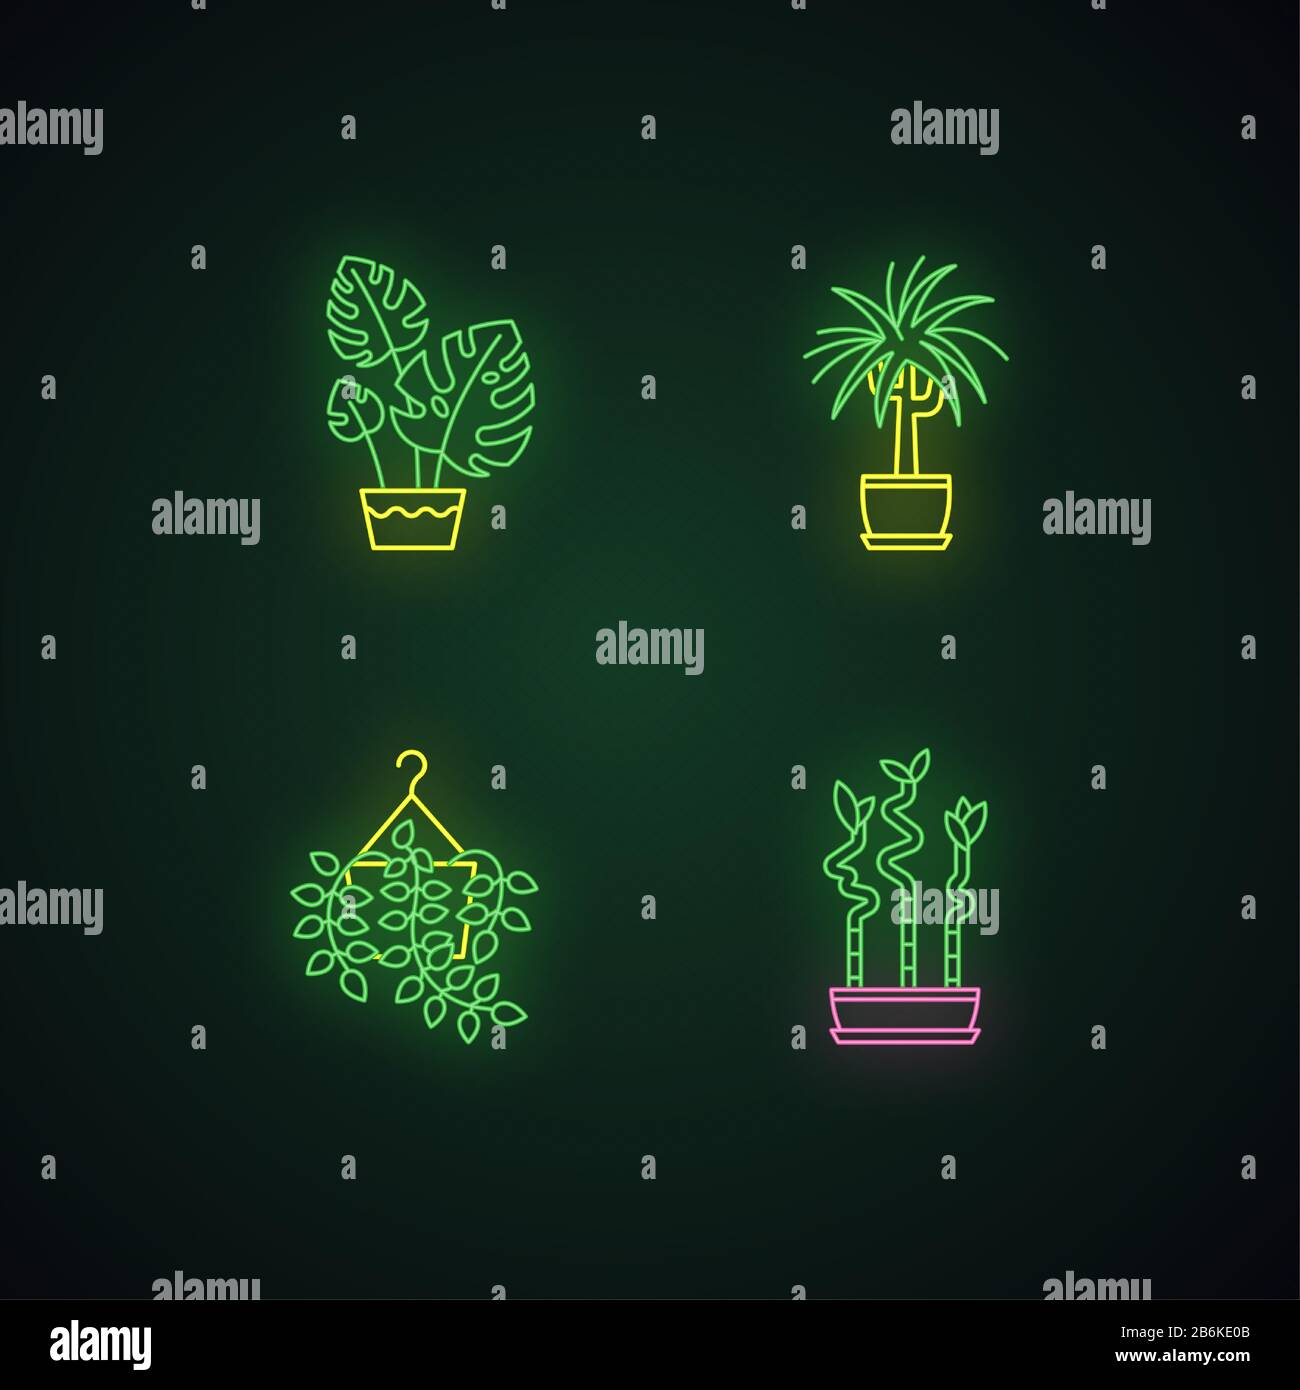 Domesticated plants neon light icons set. Houseplants. Ornamental indoor plants. Pothos, dracaena. Monstera, lucky bamboo. Signs with outer glowing Stock Vector